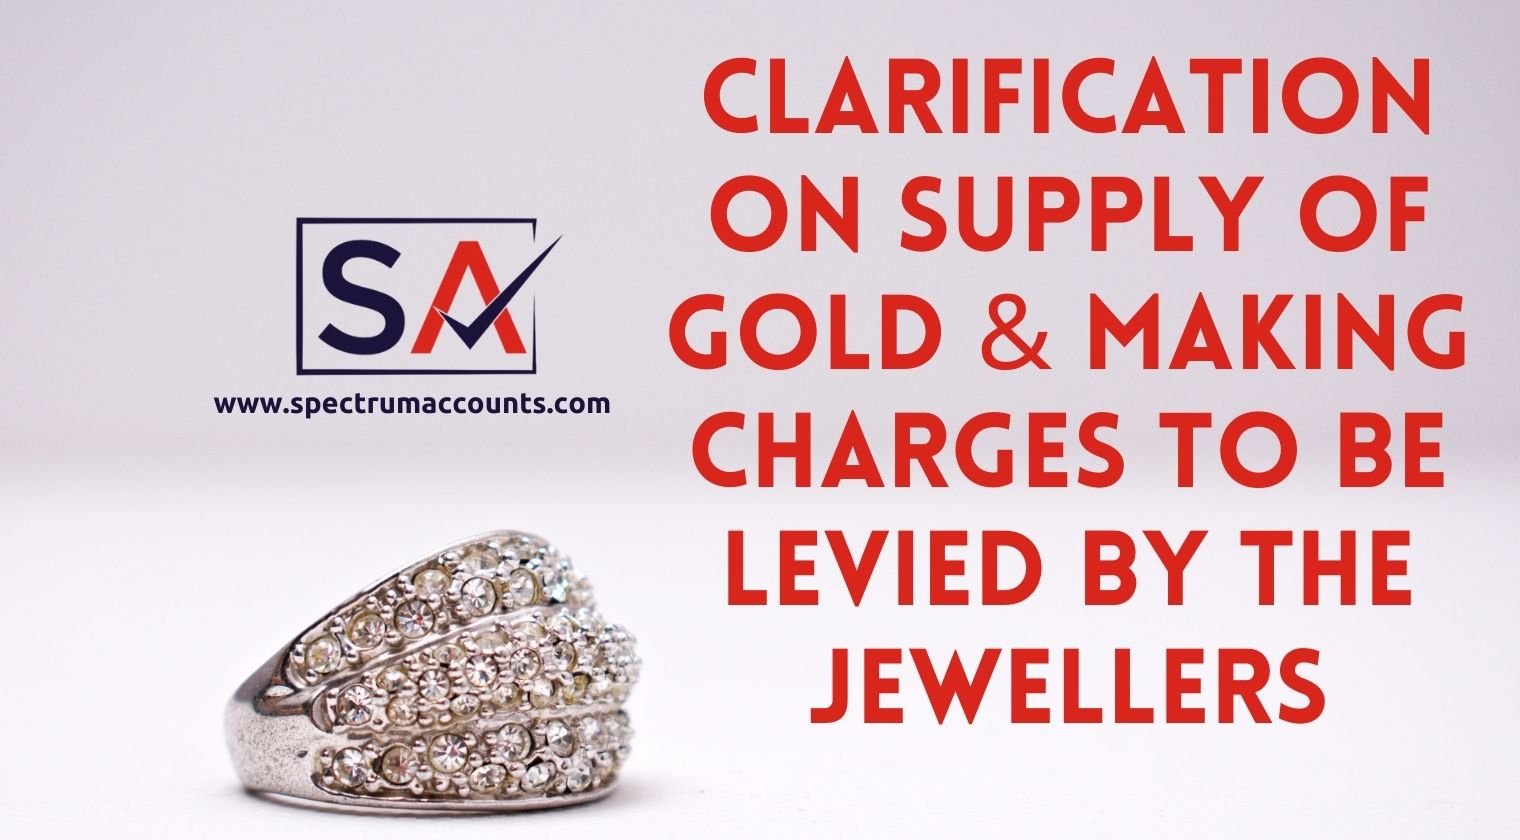 Clarification on supply of gold & making charges to be levied by the jewellers